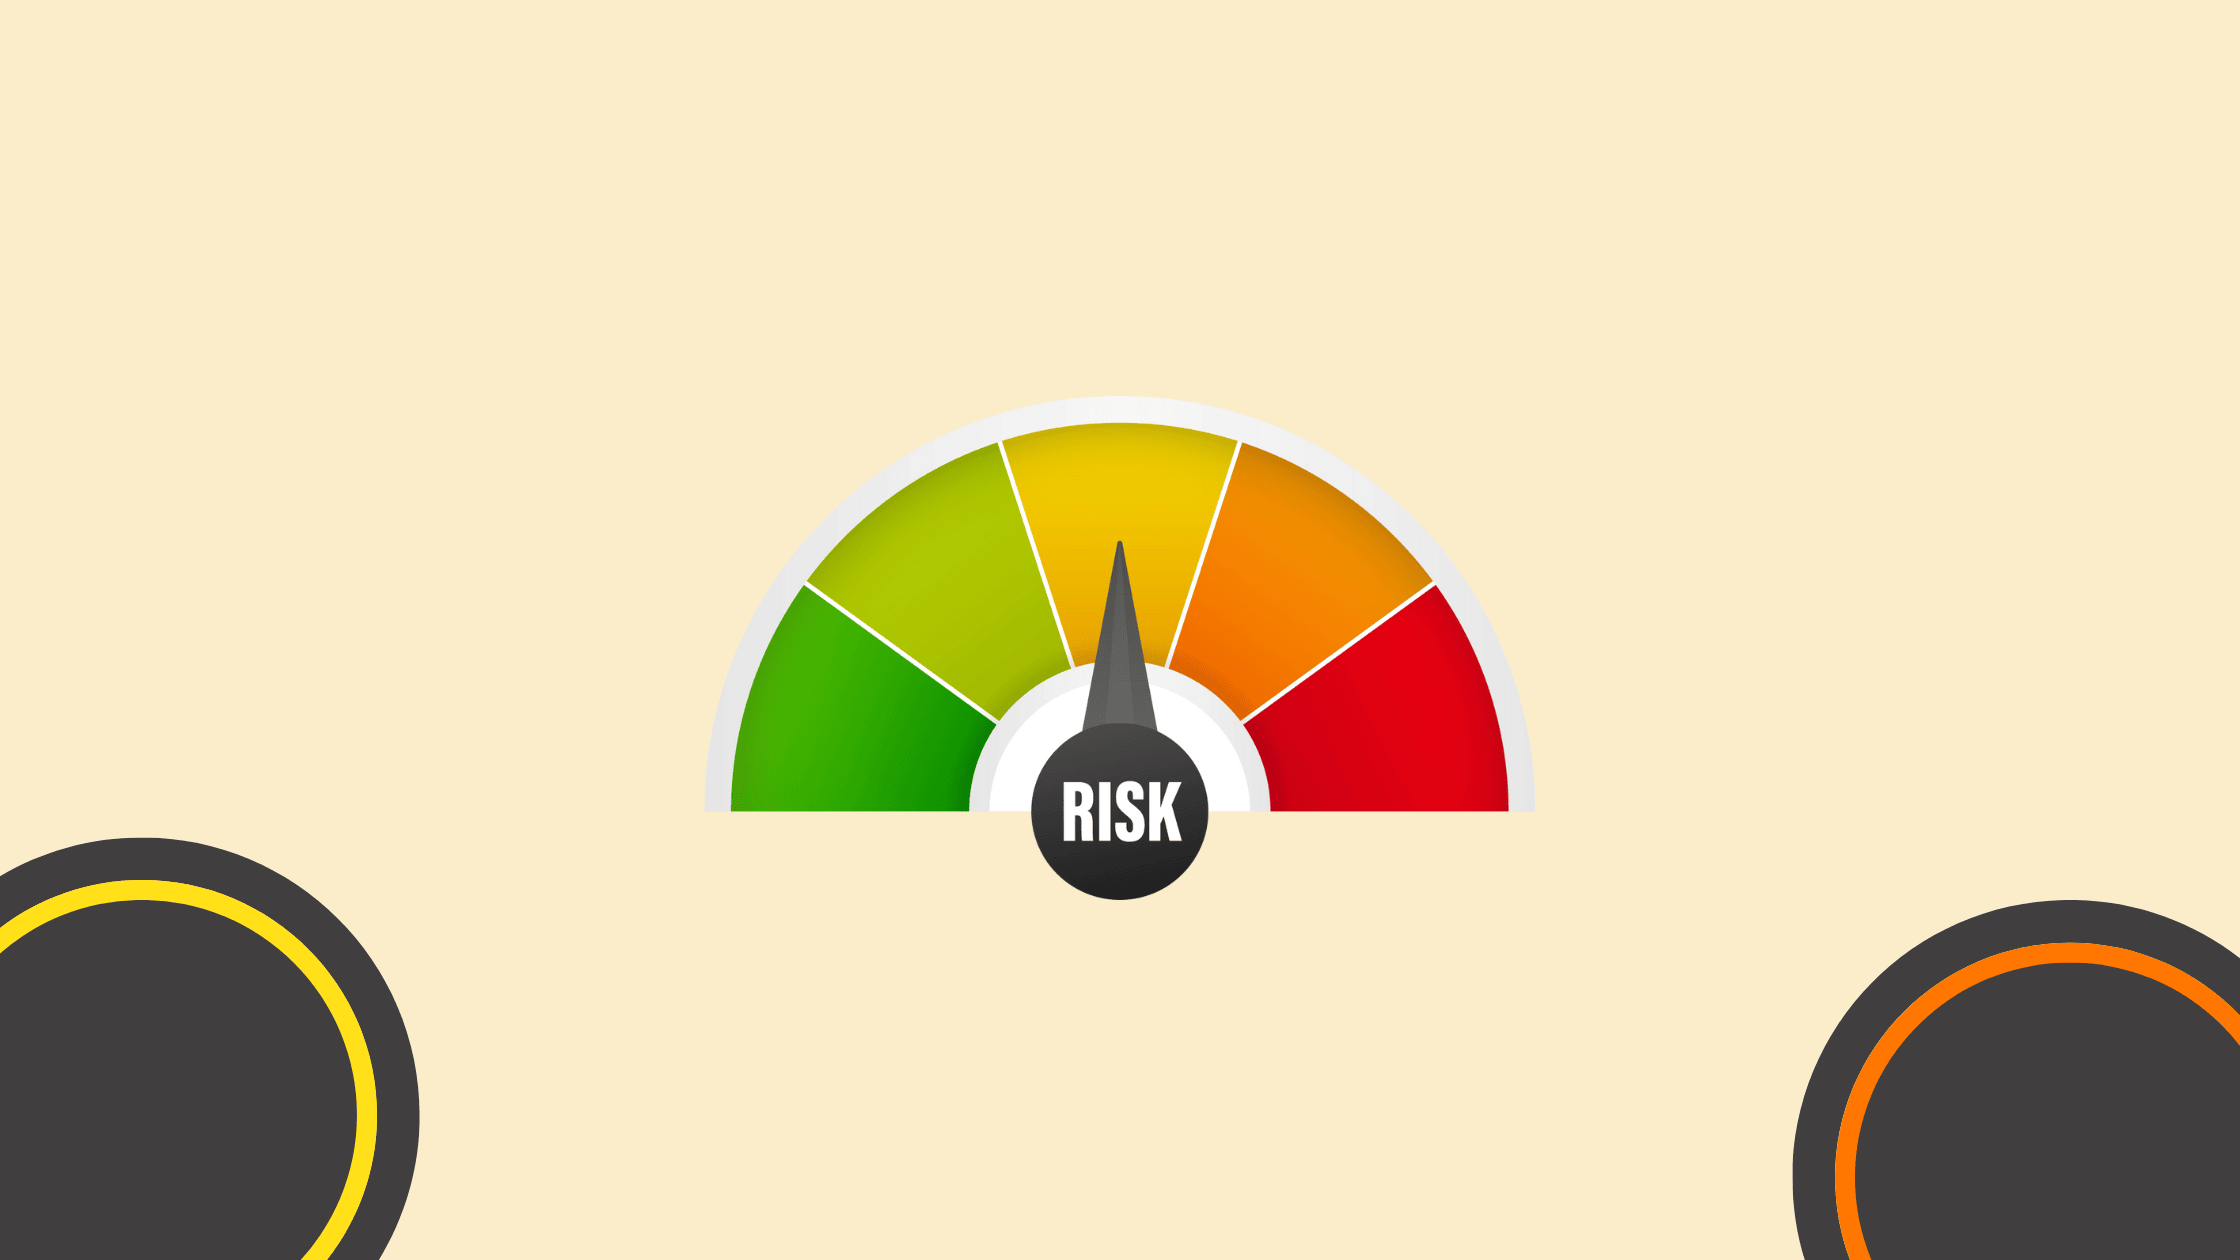 Identify and address potential risks